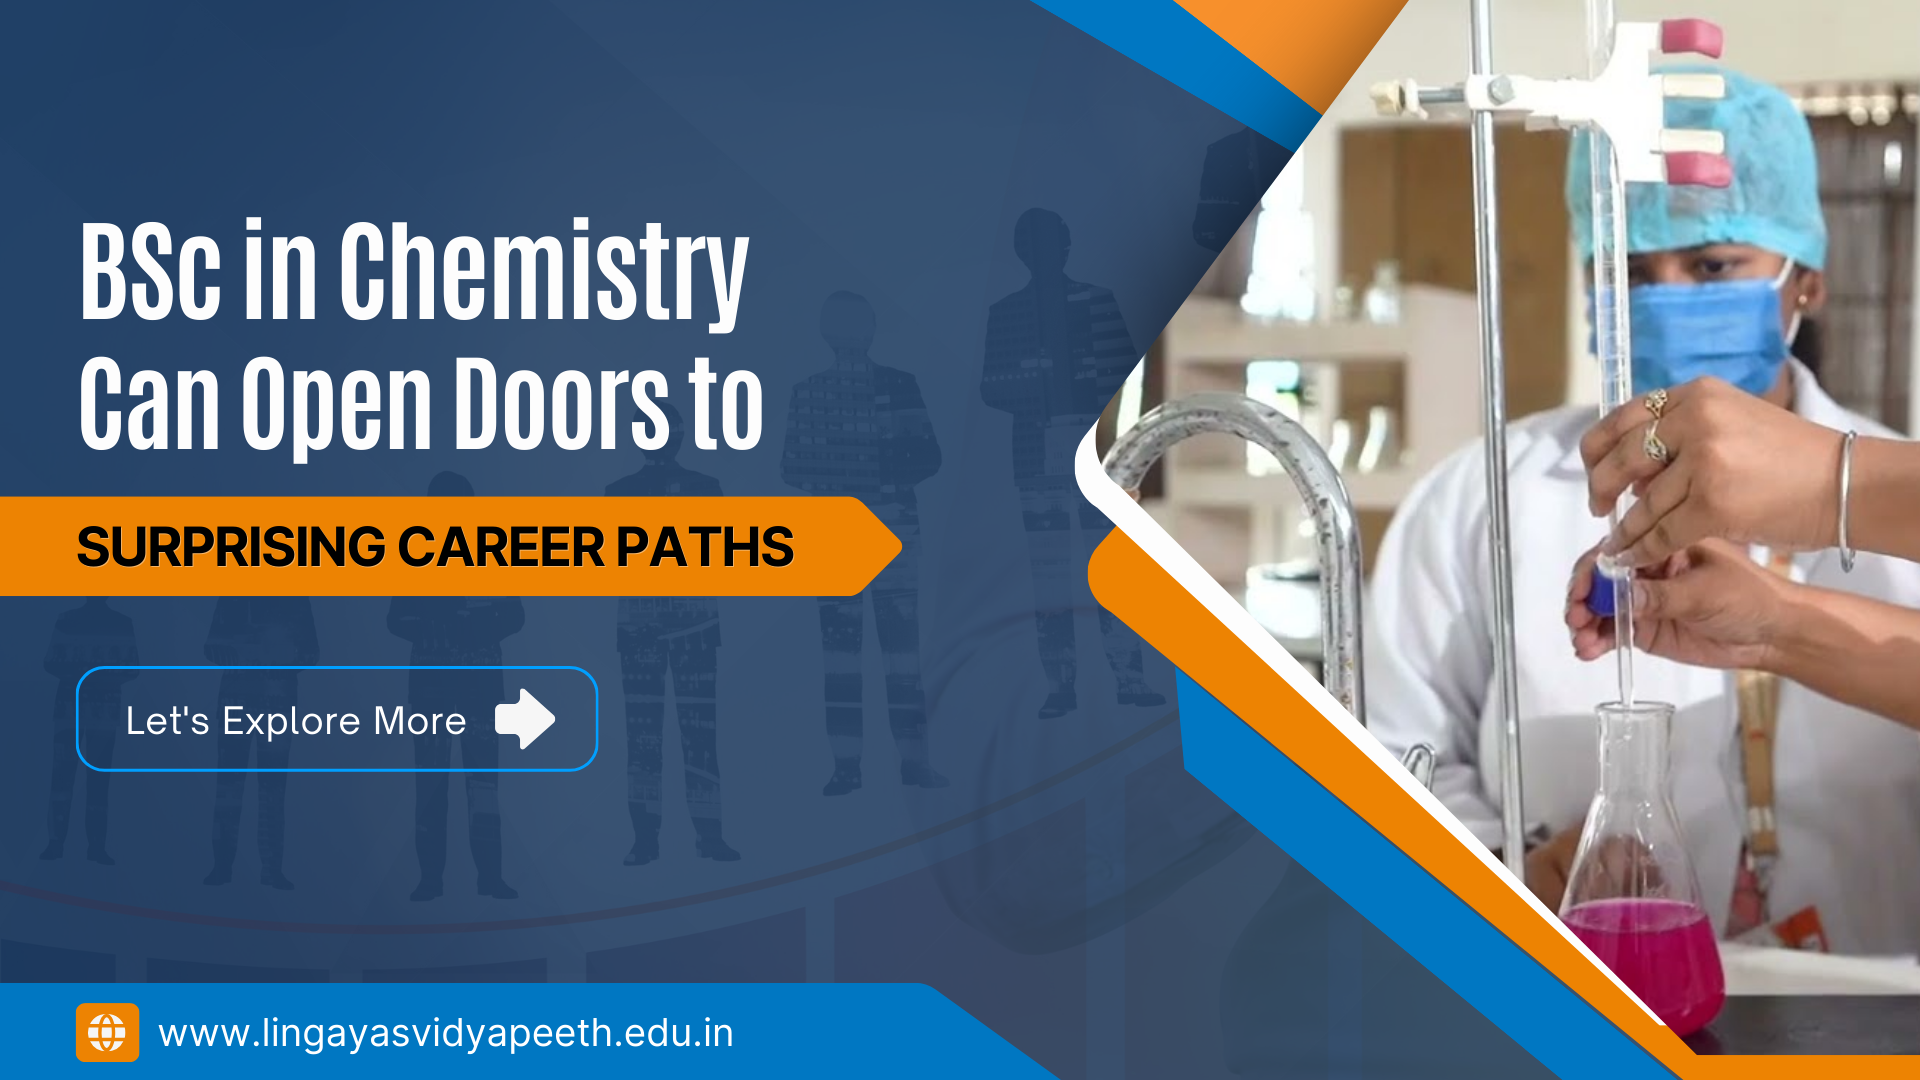 What are Some Surprising Career Paths a BSc in Chemistry Can Open Doors to?